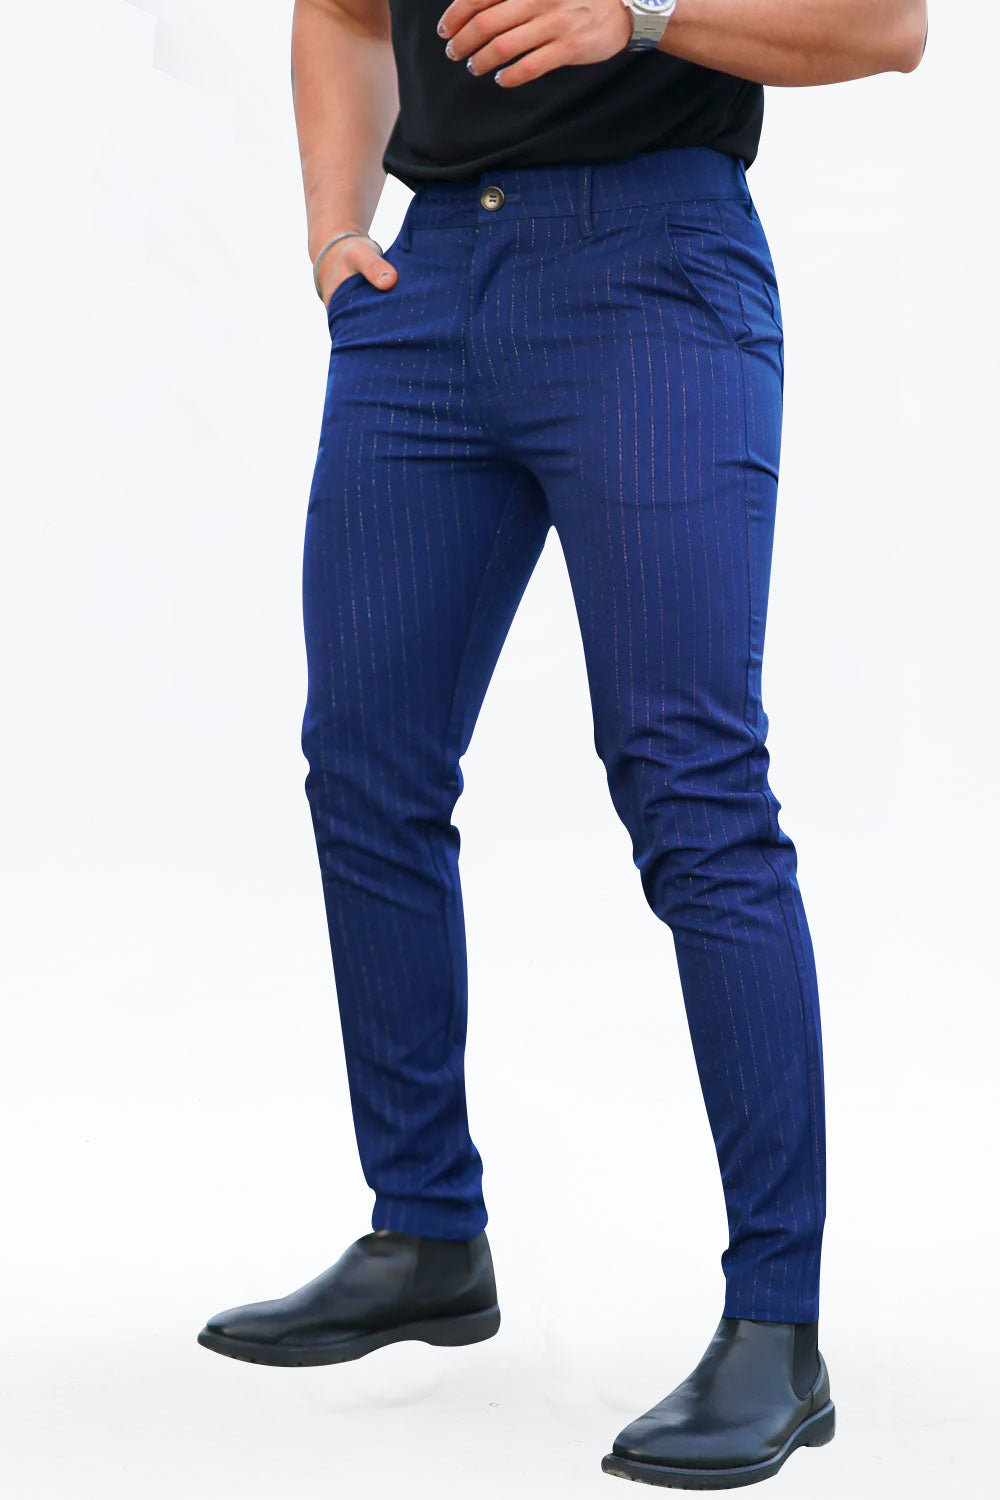 Gingtto Navy Blue Vertical Stripes Fashion Chinos With Good Stretch